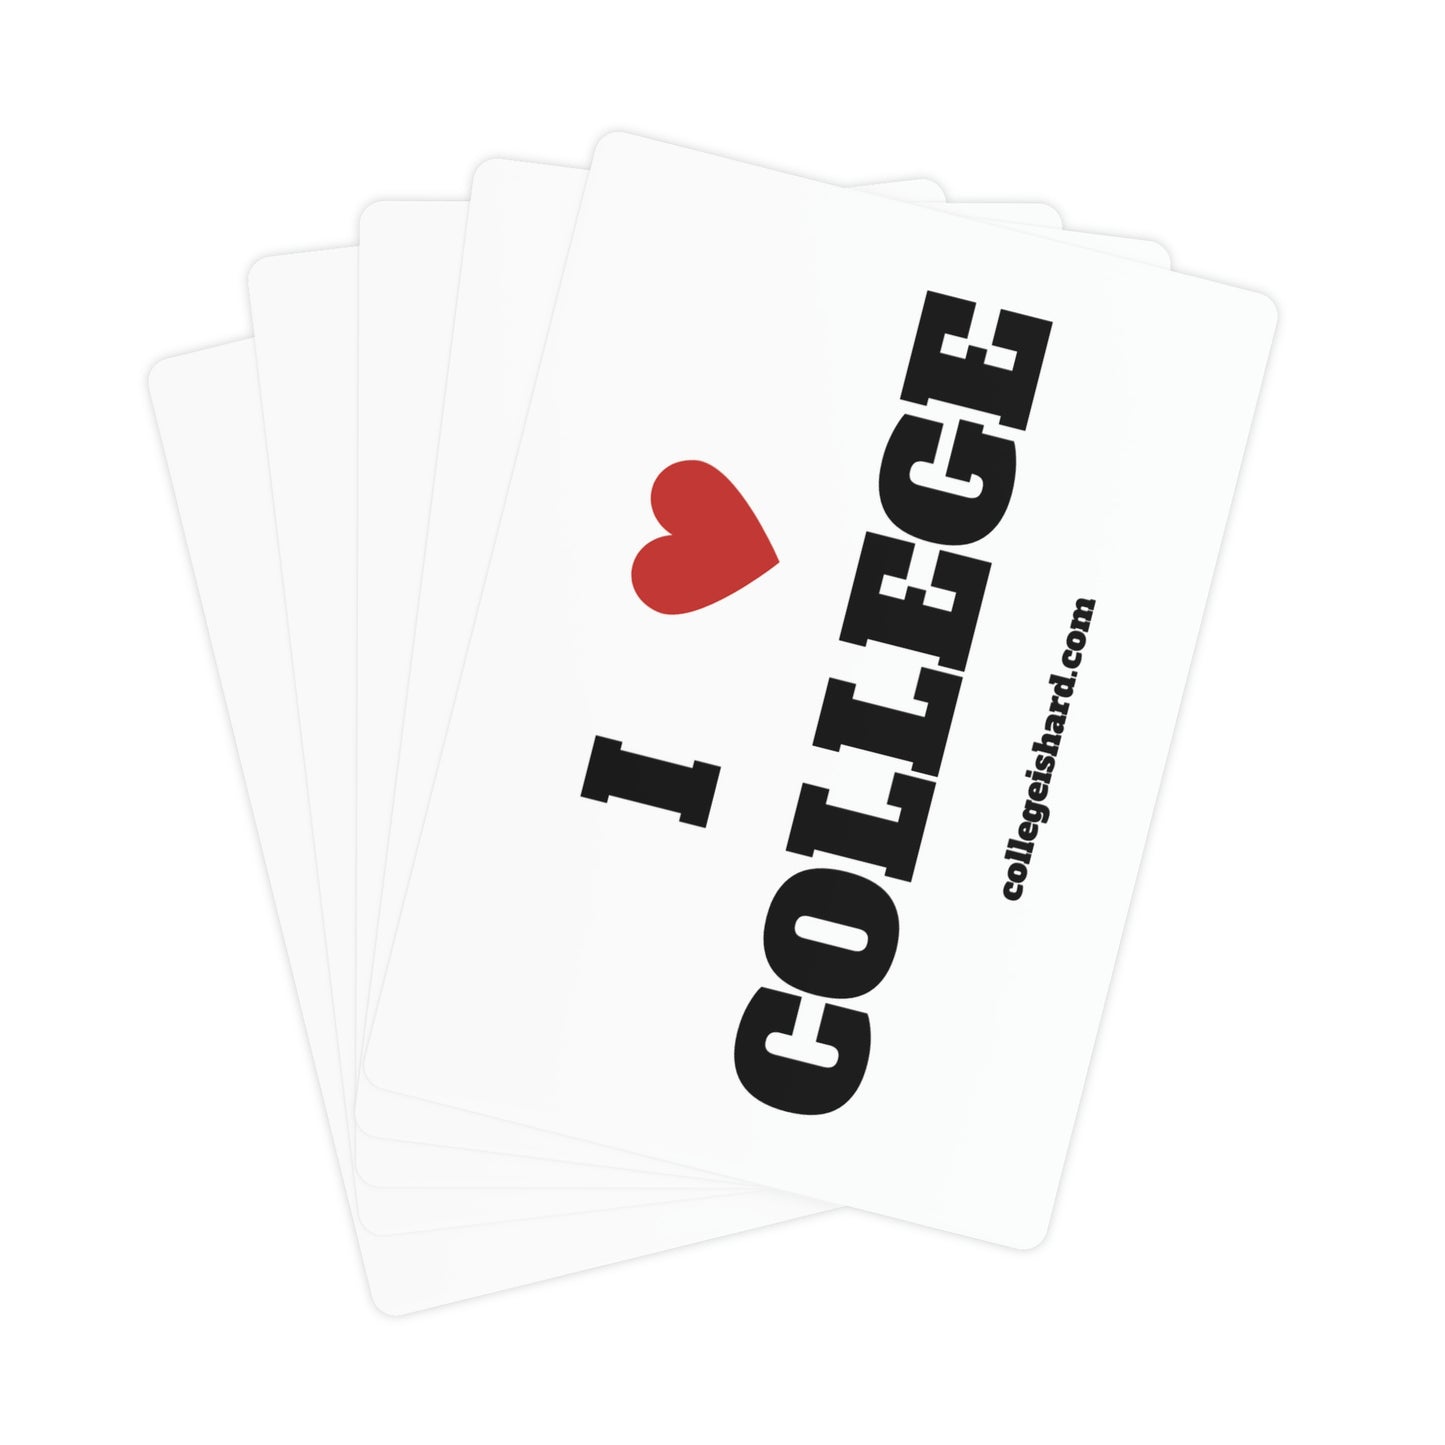 COLLEGE IS HARD playing cards